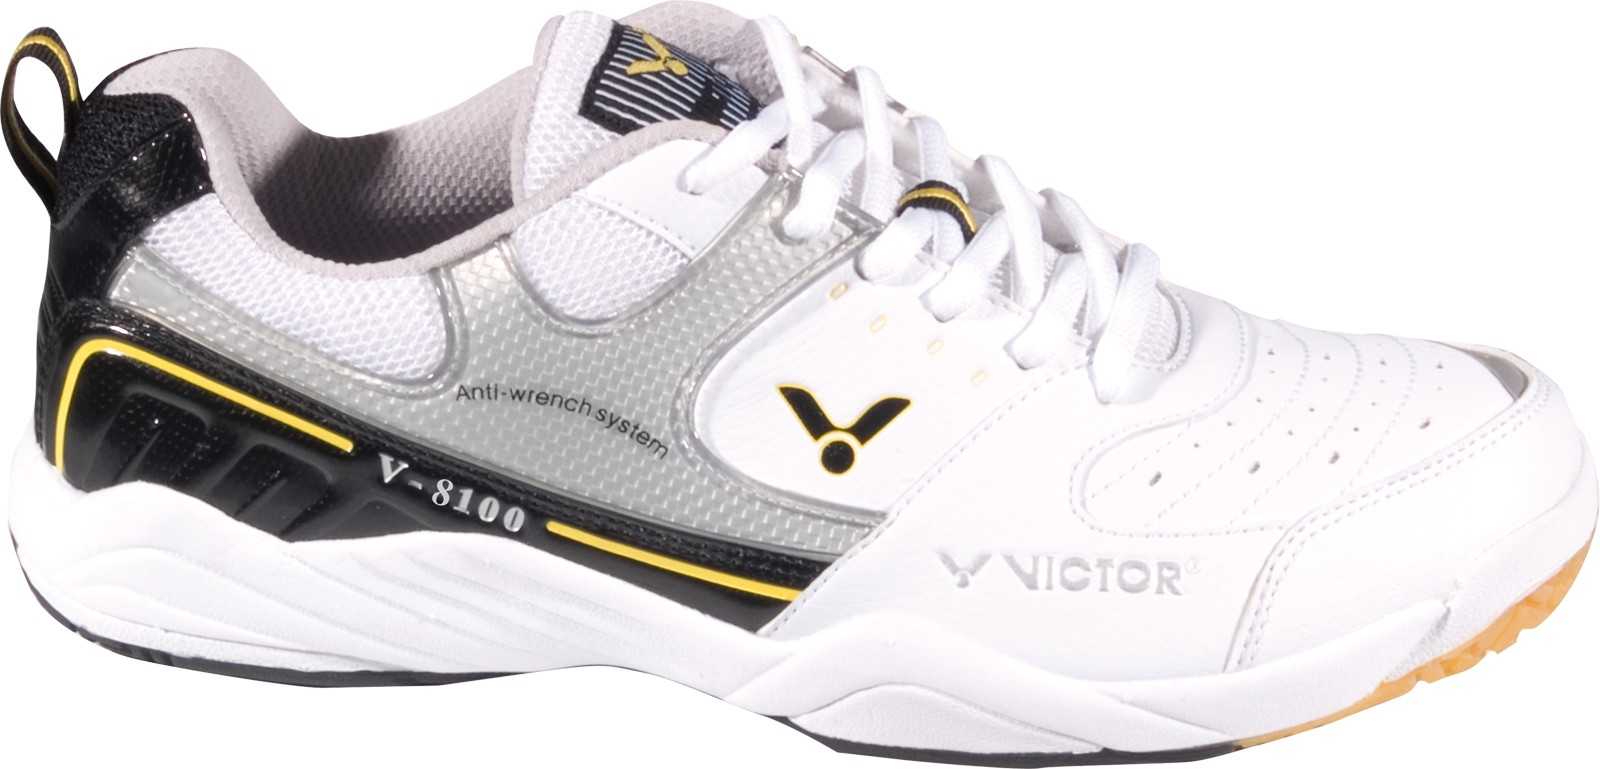 CHAUSSURES VICTOR V-8100 TEAM